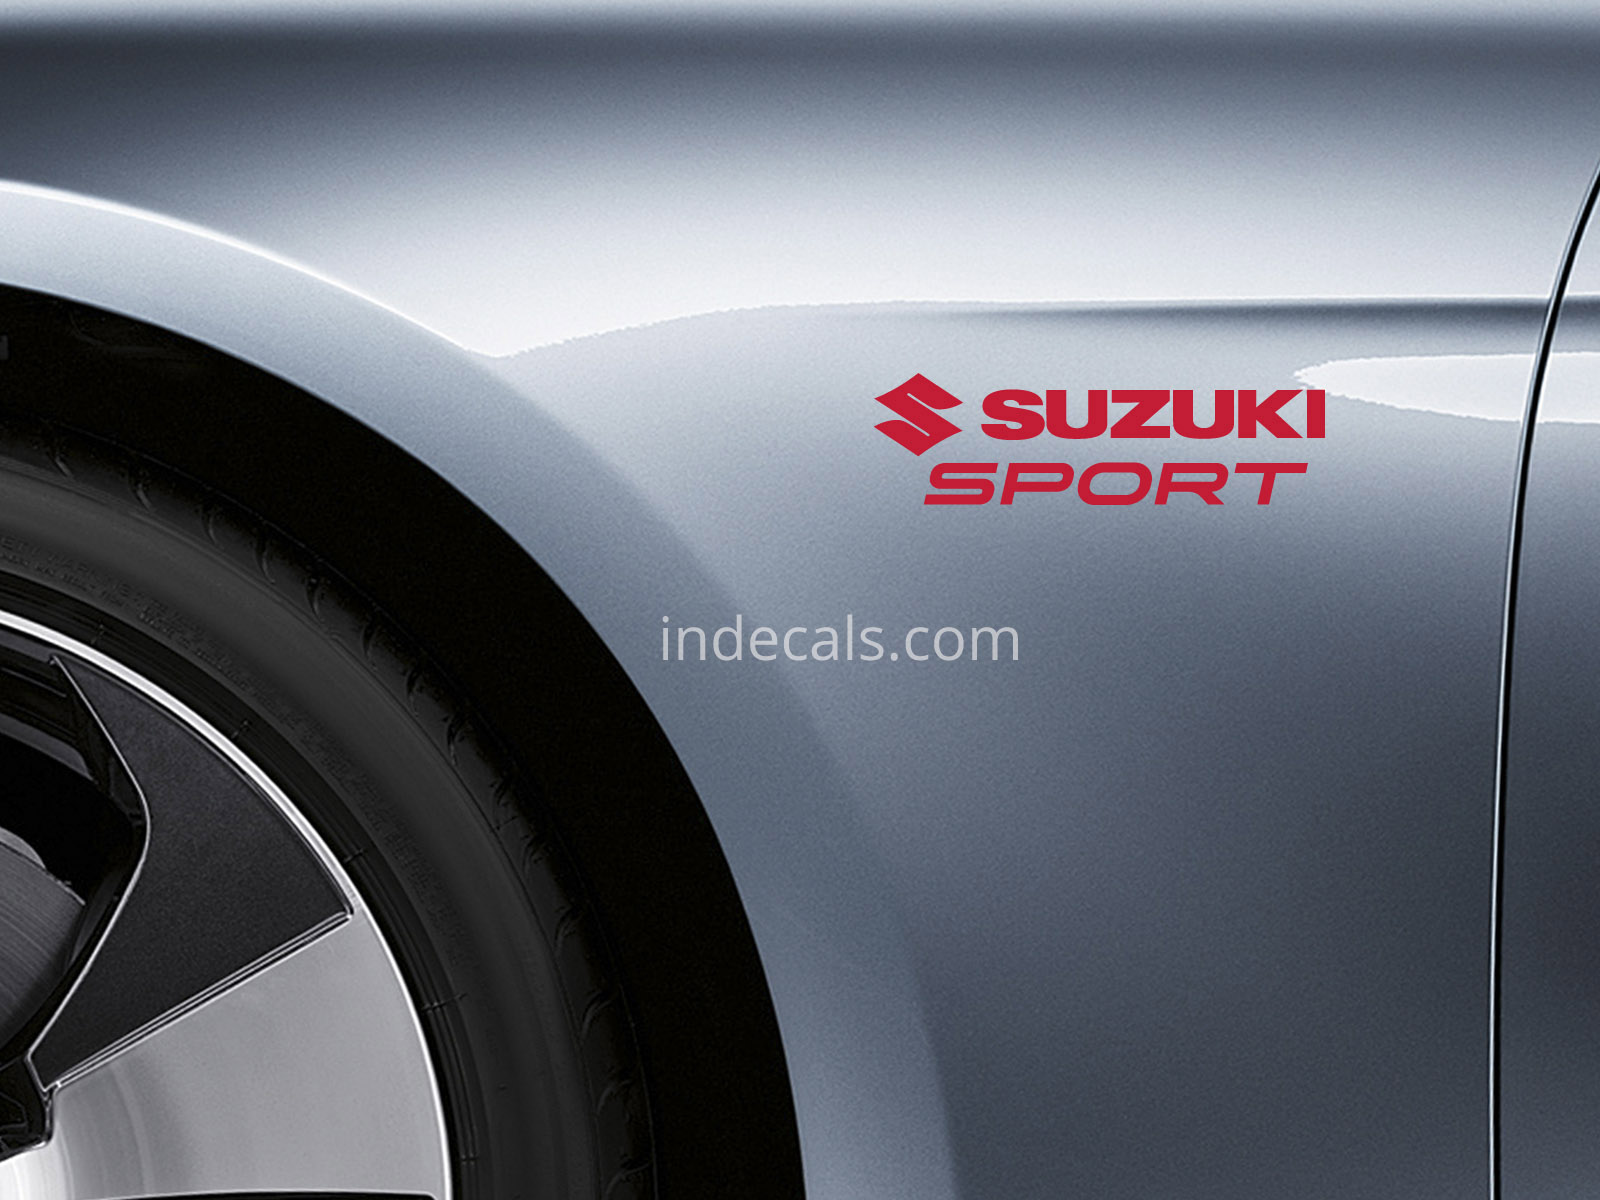 2 x Suzuki Sports stickers for Wings - Red